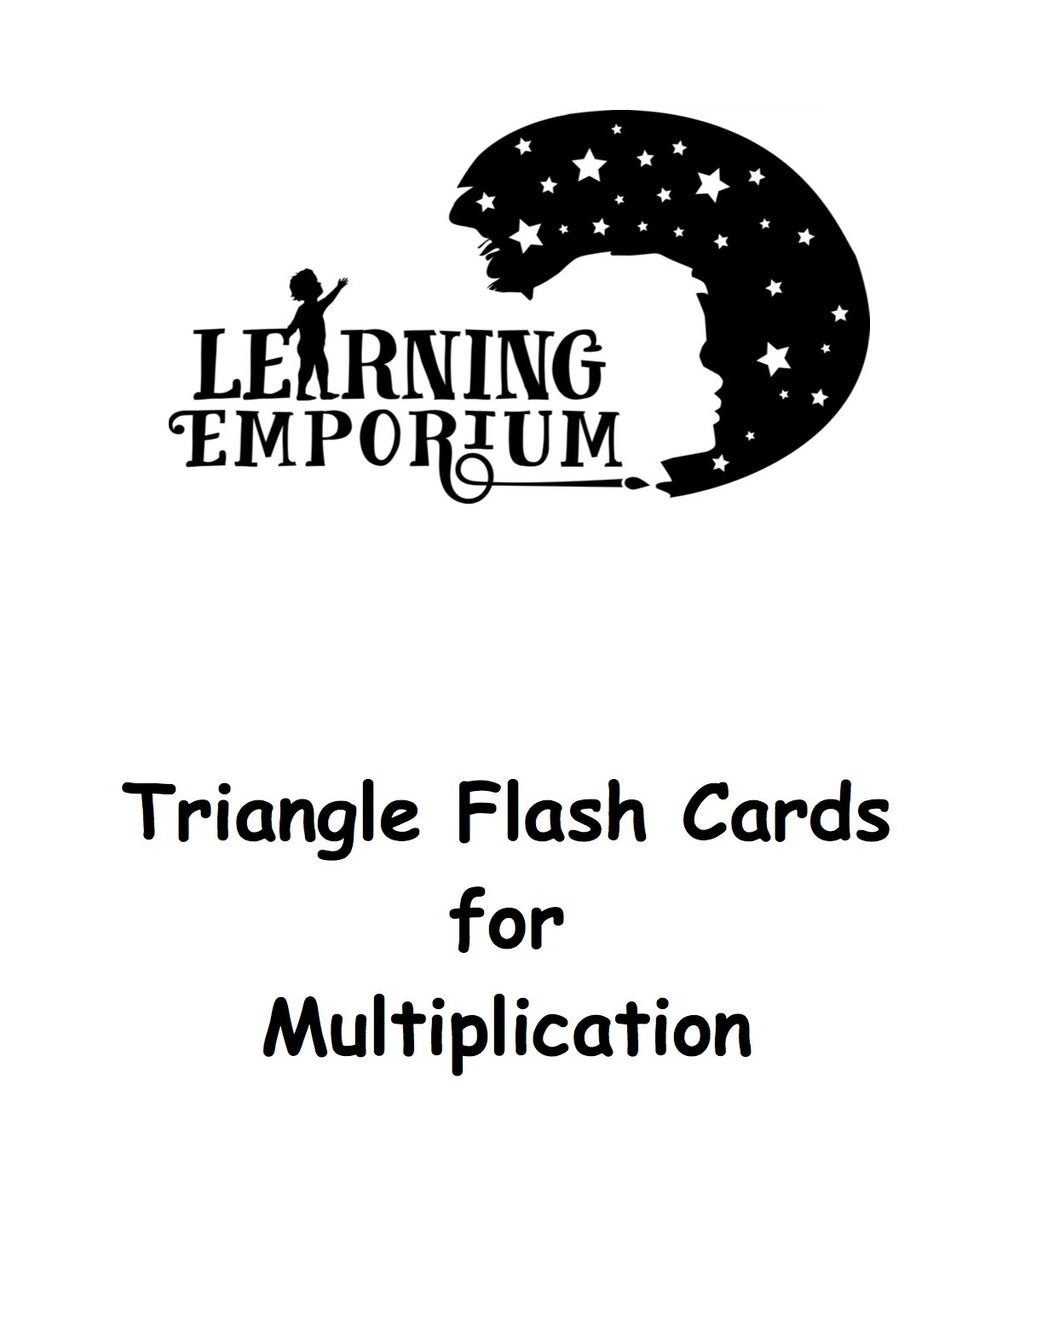 Triangle Flashcards for Multiplication